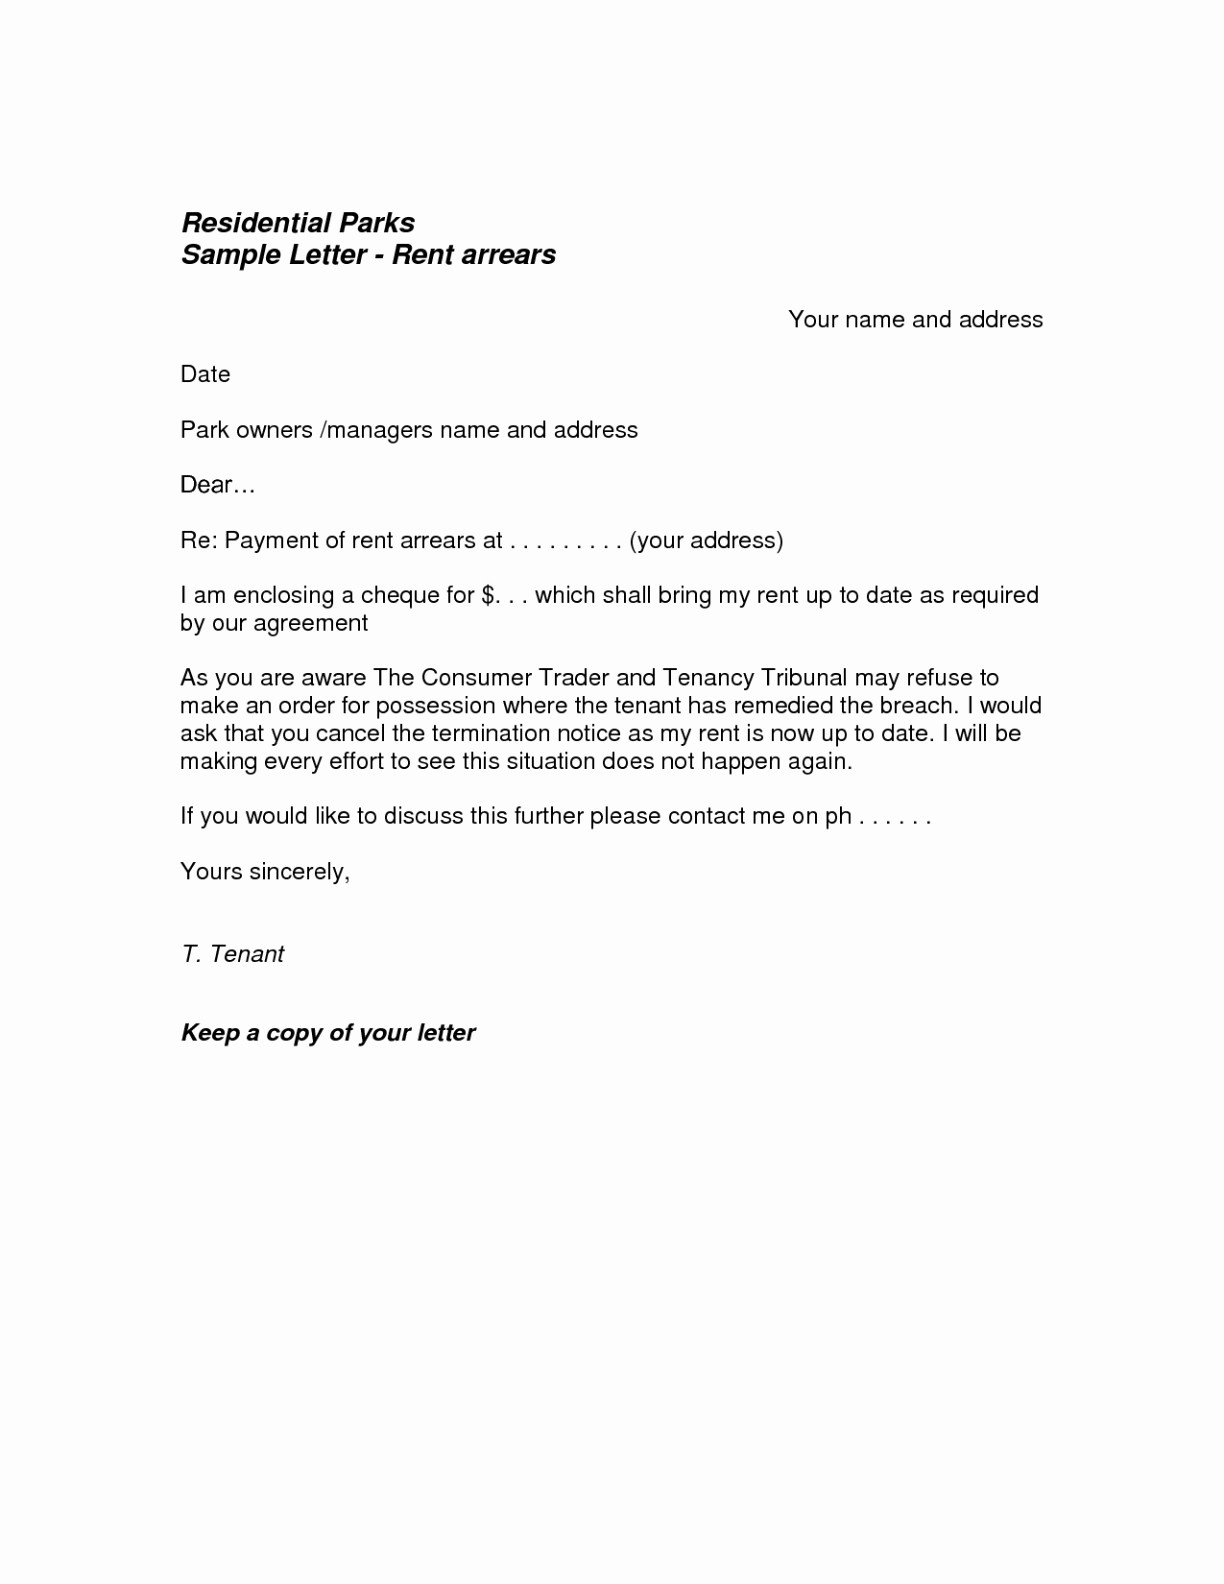 Termination Of Lease Agreement How To Write A Rental Agreement Letter Monzaberglauf Verband